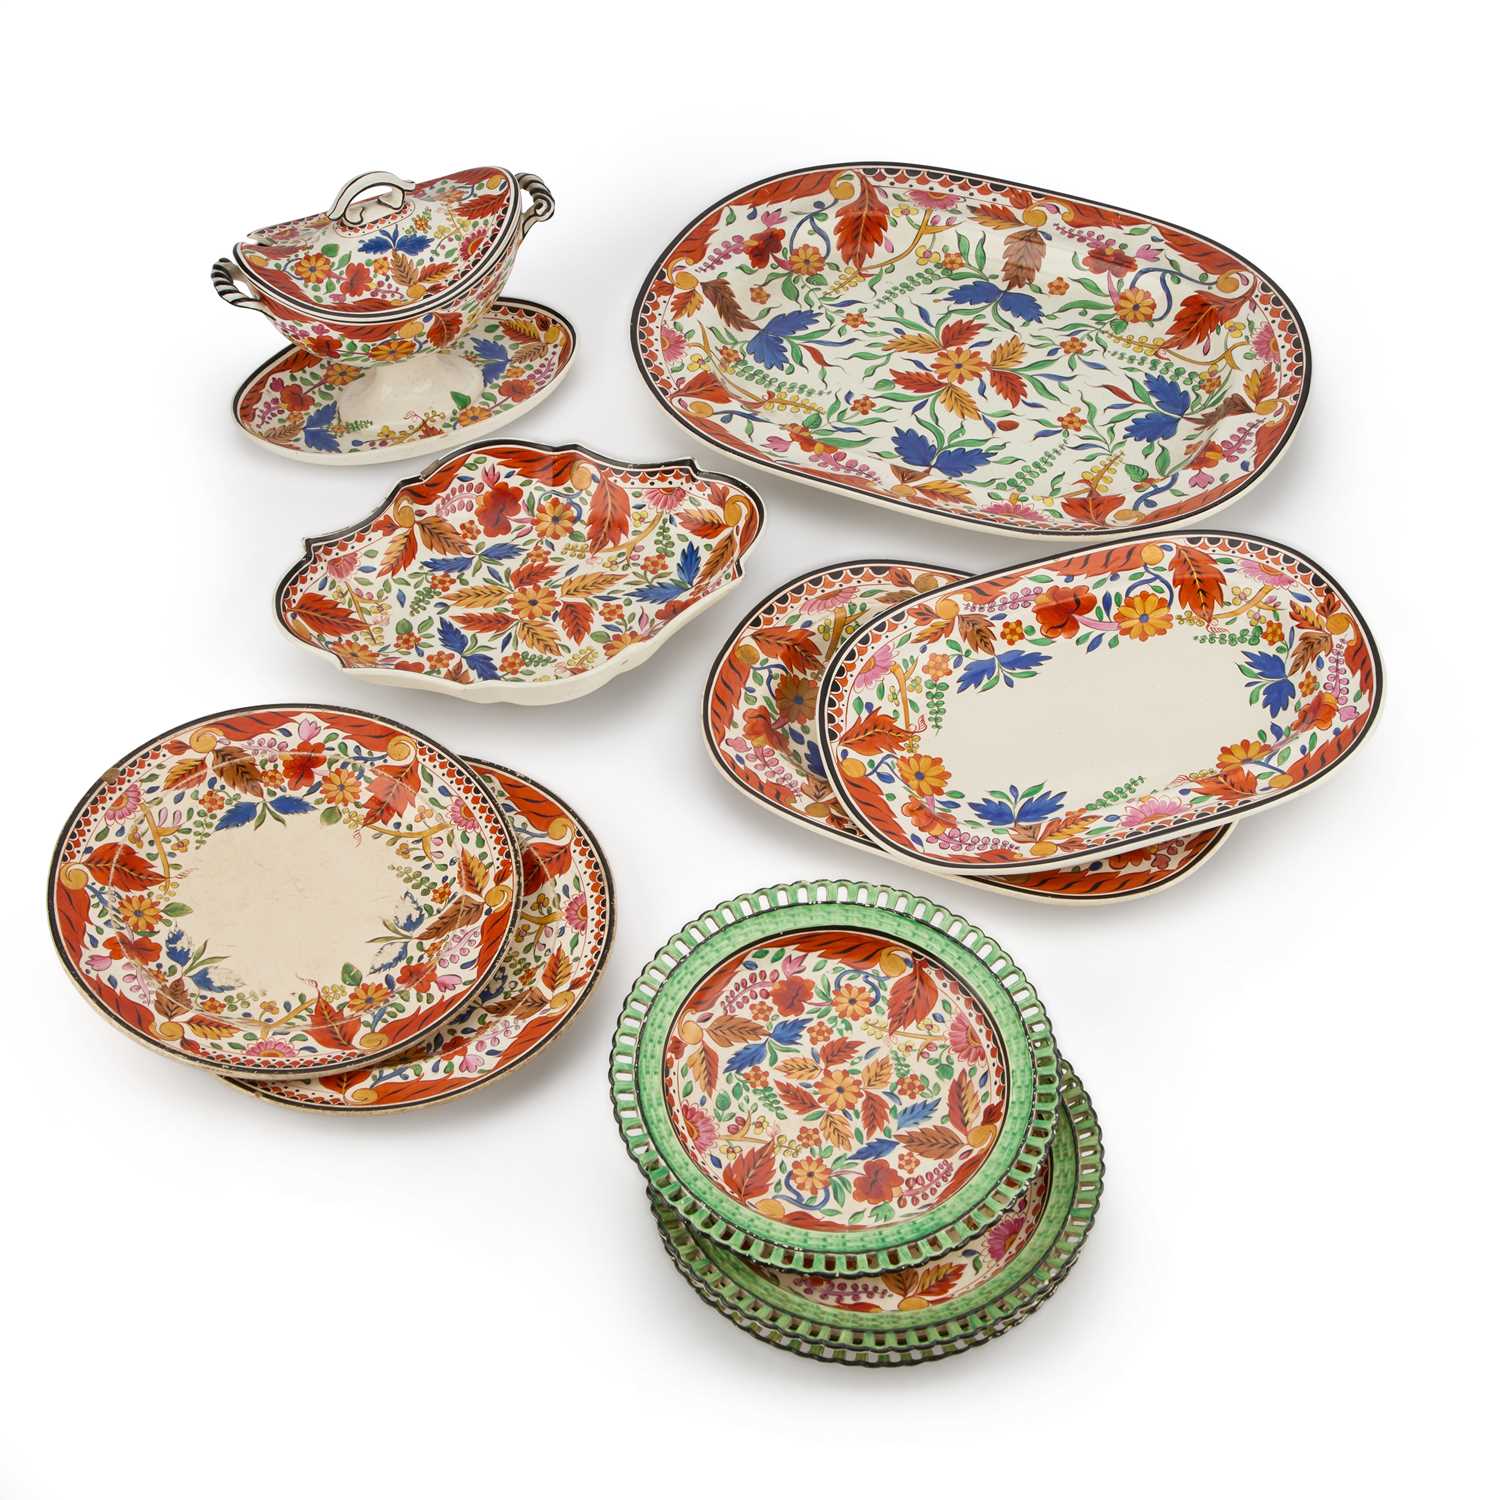 A LATE 18TH CENTURY SPODE PARTIAL DINNER SERVICE